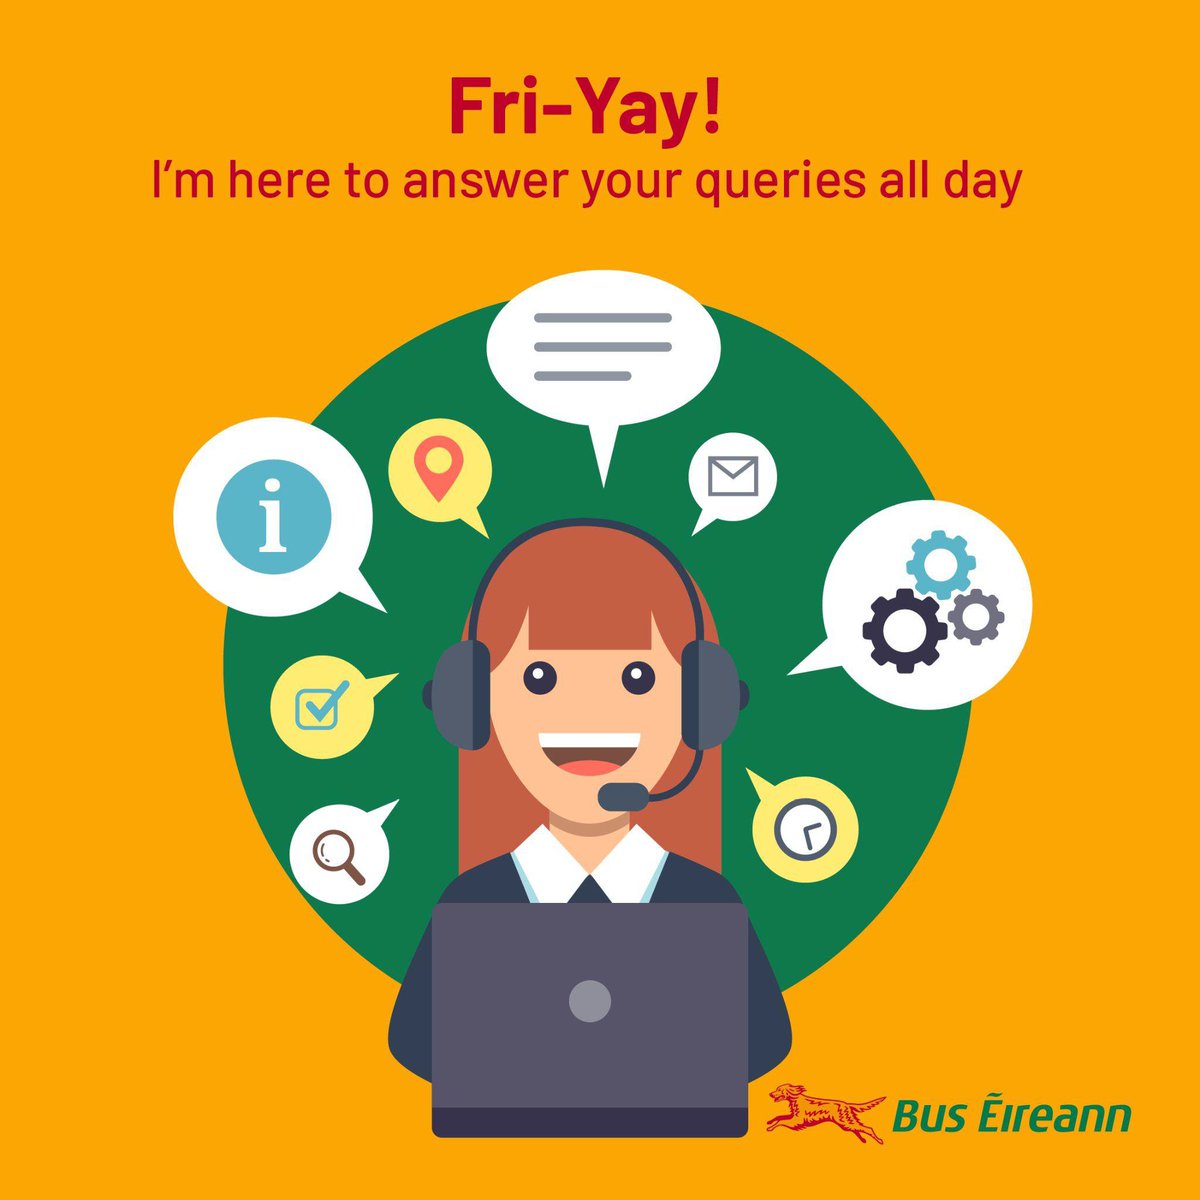 Woo! That Friday feeling! If you’re feeling unsure about something, lay your questions on us -we’re here to help! Ash